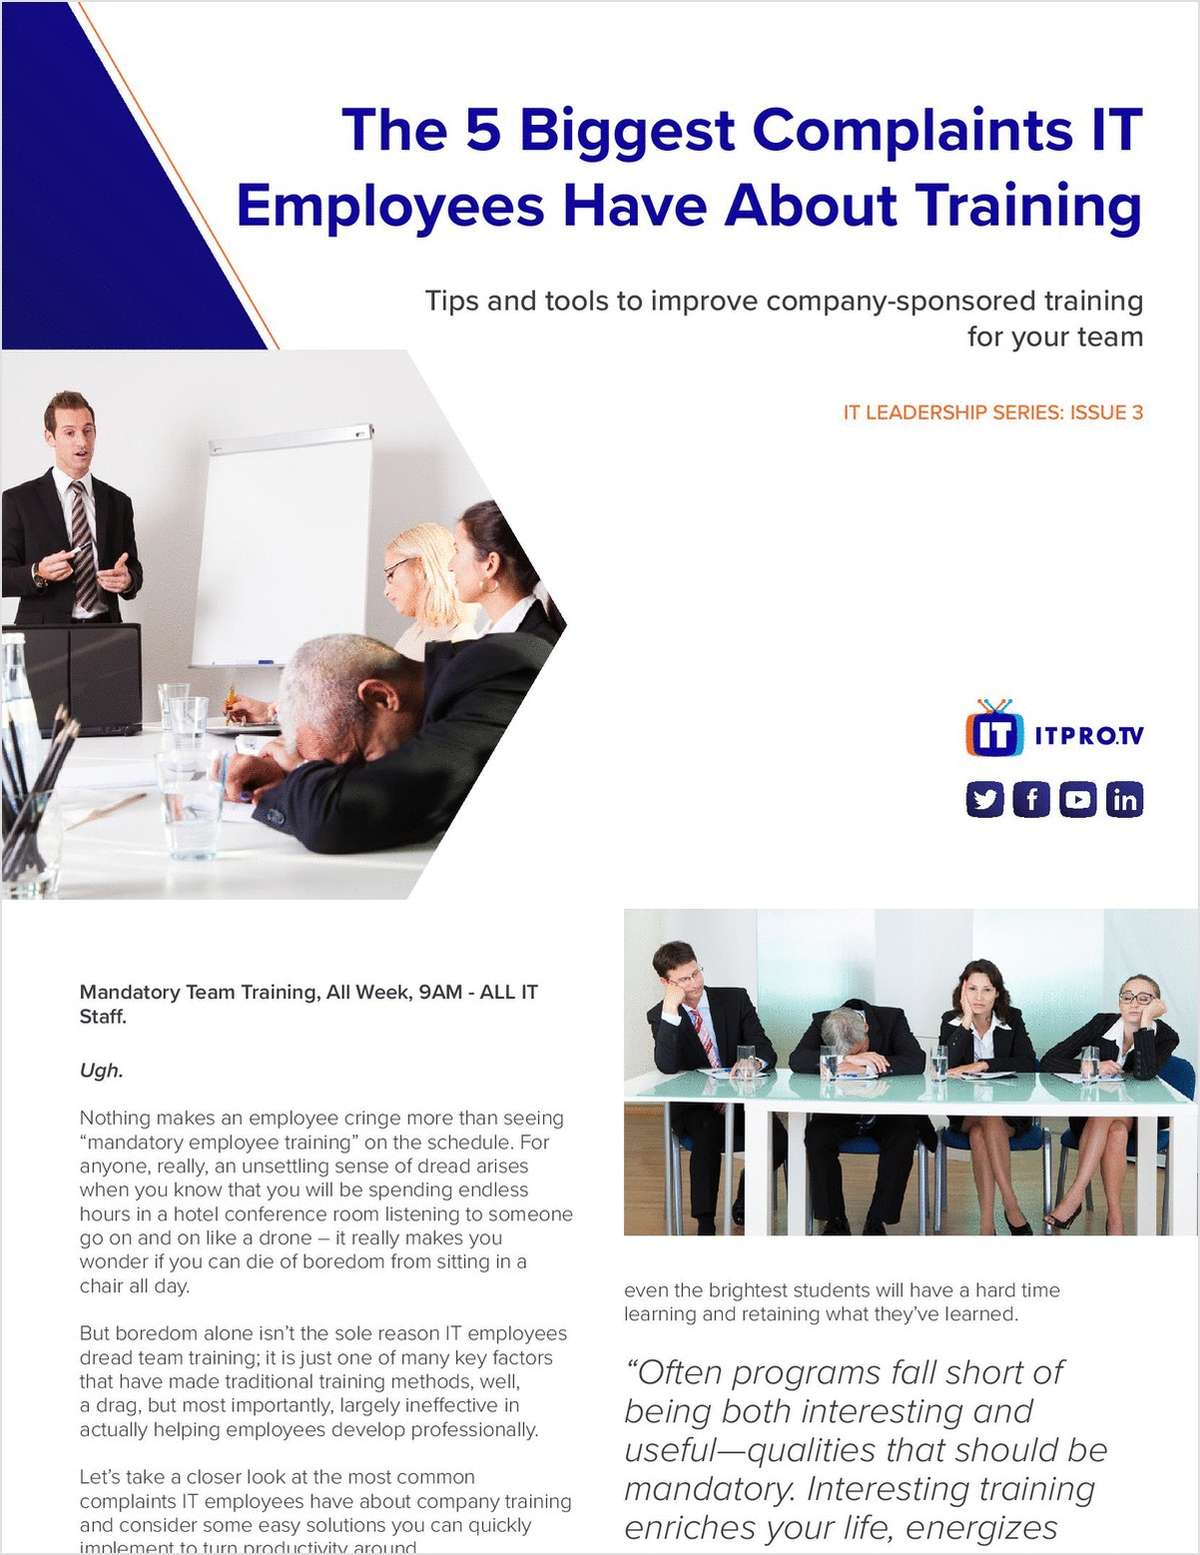 The 5 Biggest Complaints Employees Have About Training: Tips and Tools to Improve Company-sponsored Training for Your Team